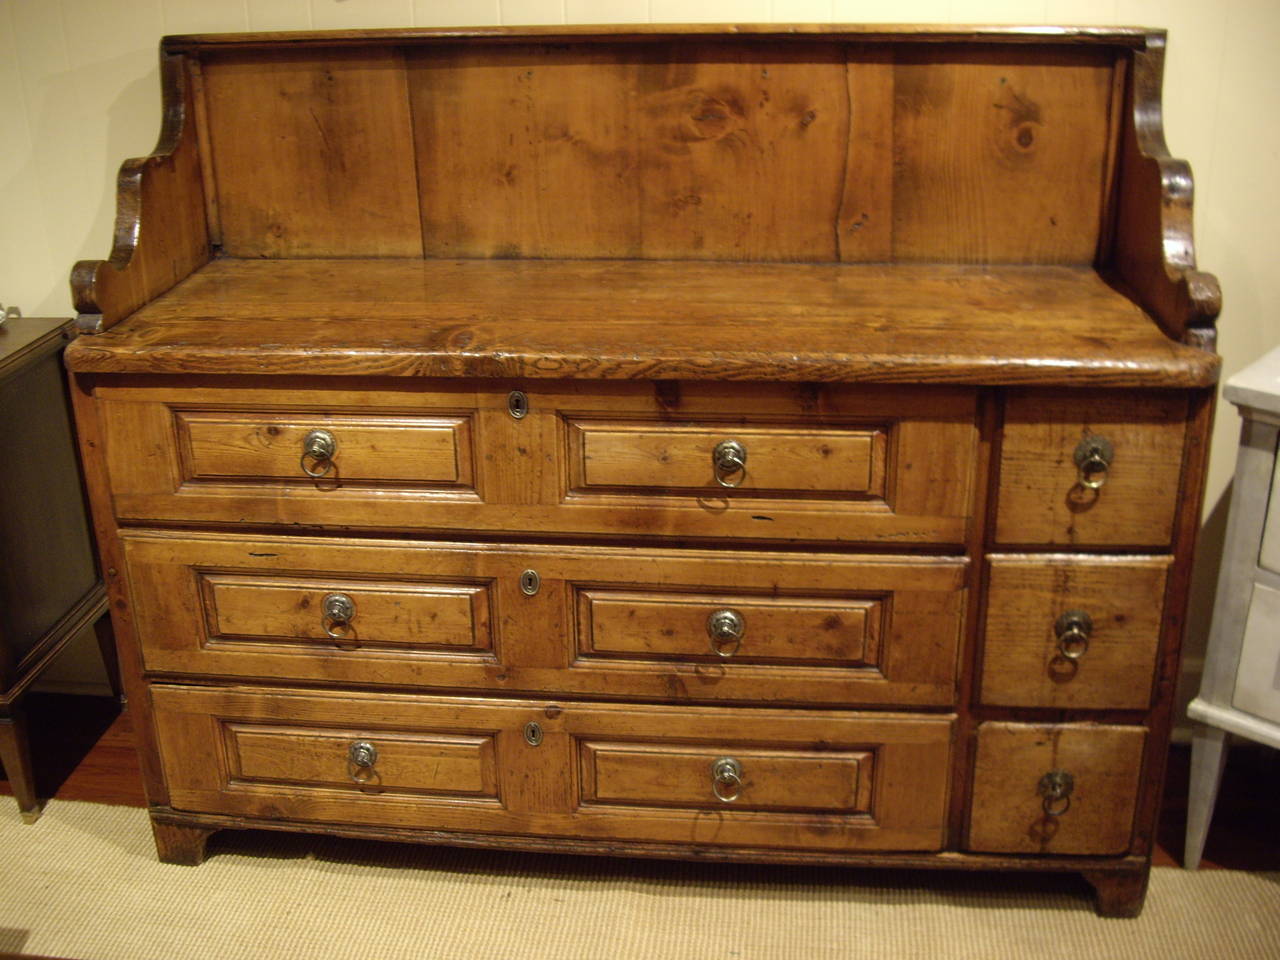 Beautiful warm rustic Swiss kitchen commode. Very nice patina. Height of tabletop.